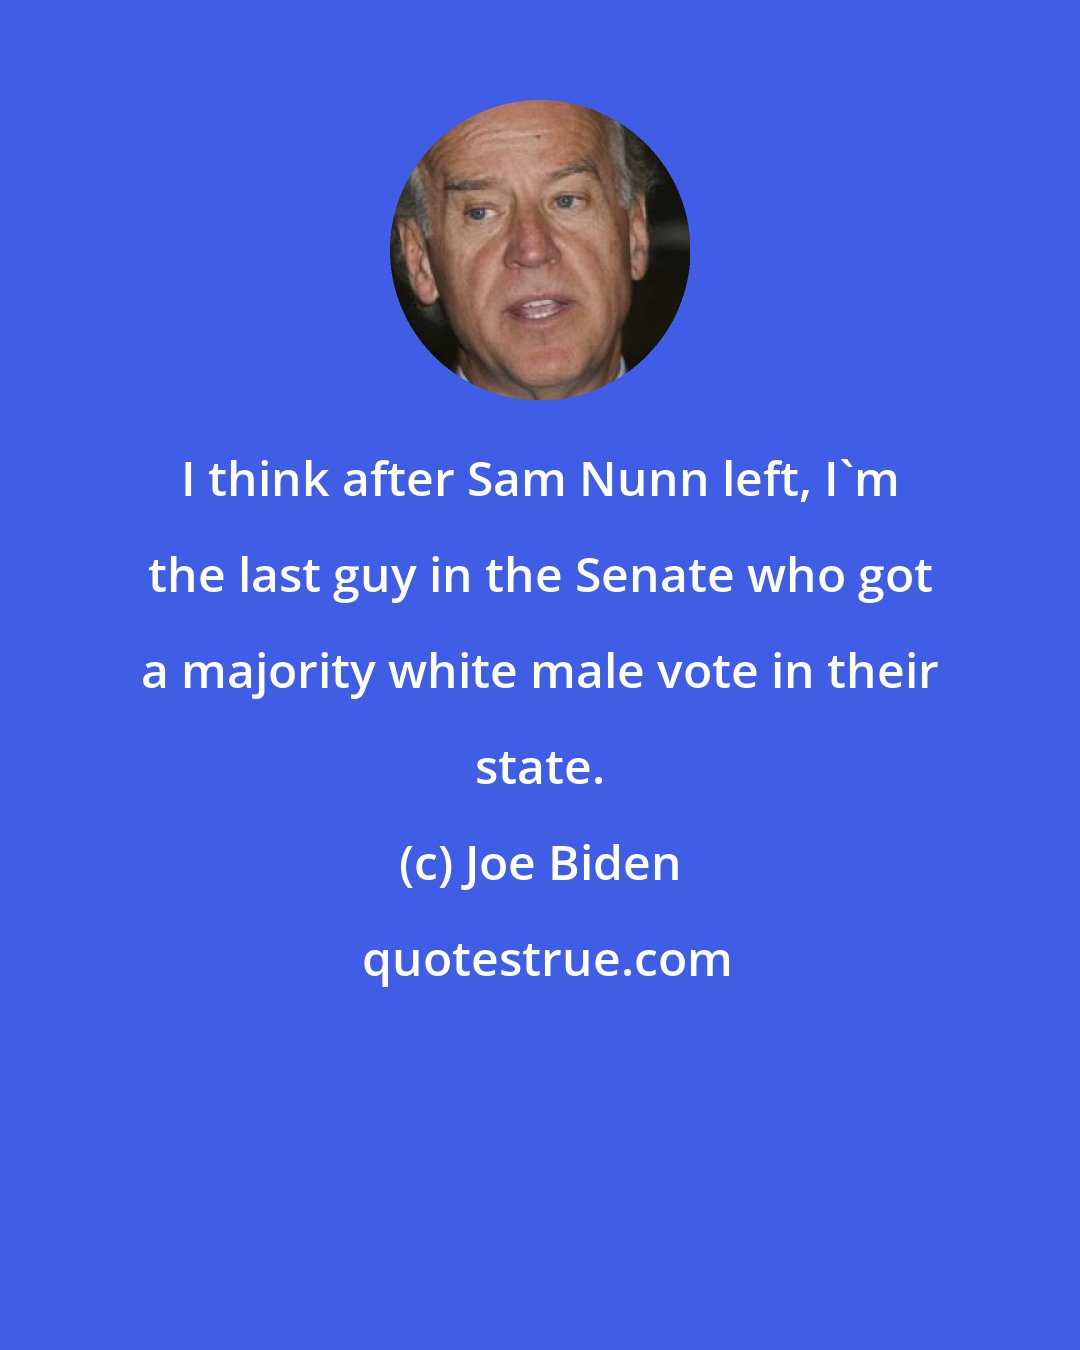 Joe Biden: I think after Sam Nunn left, I'm the last guy in the Senate who got a majority white male vote in their state.